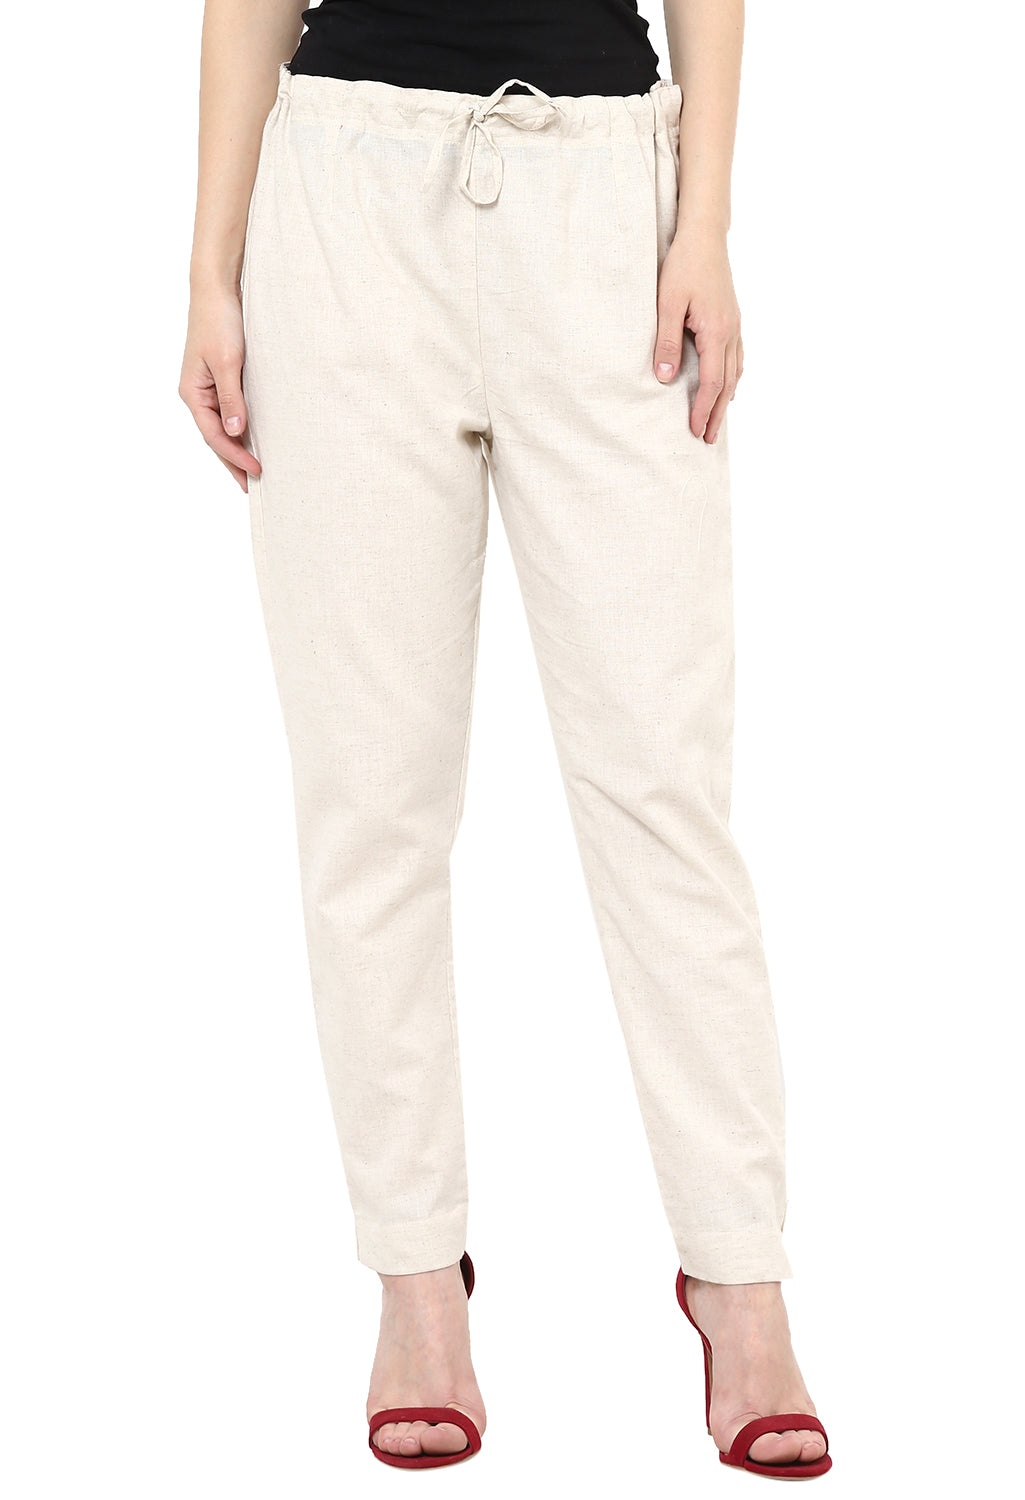 Off-White Cotton Pants for Ladies - Work Wear Cotton Trousers for Women